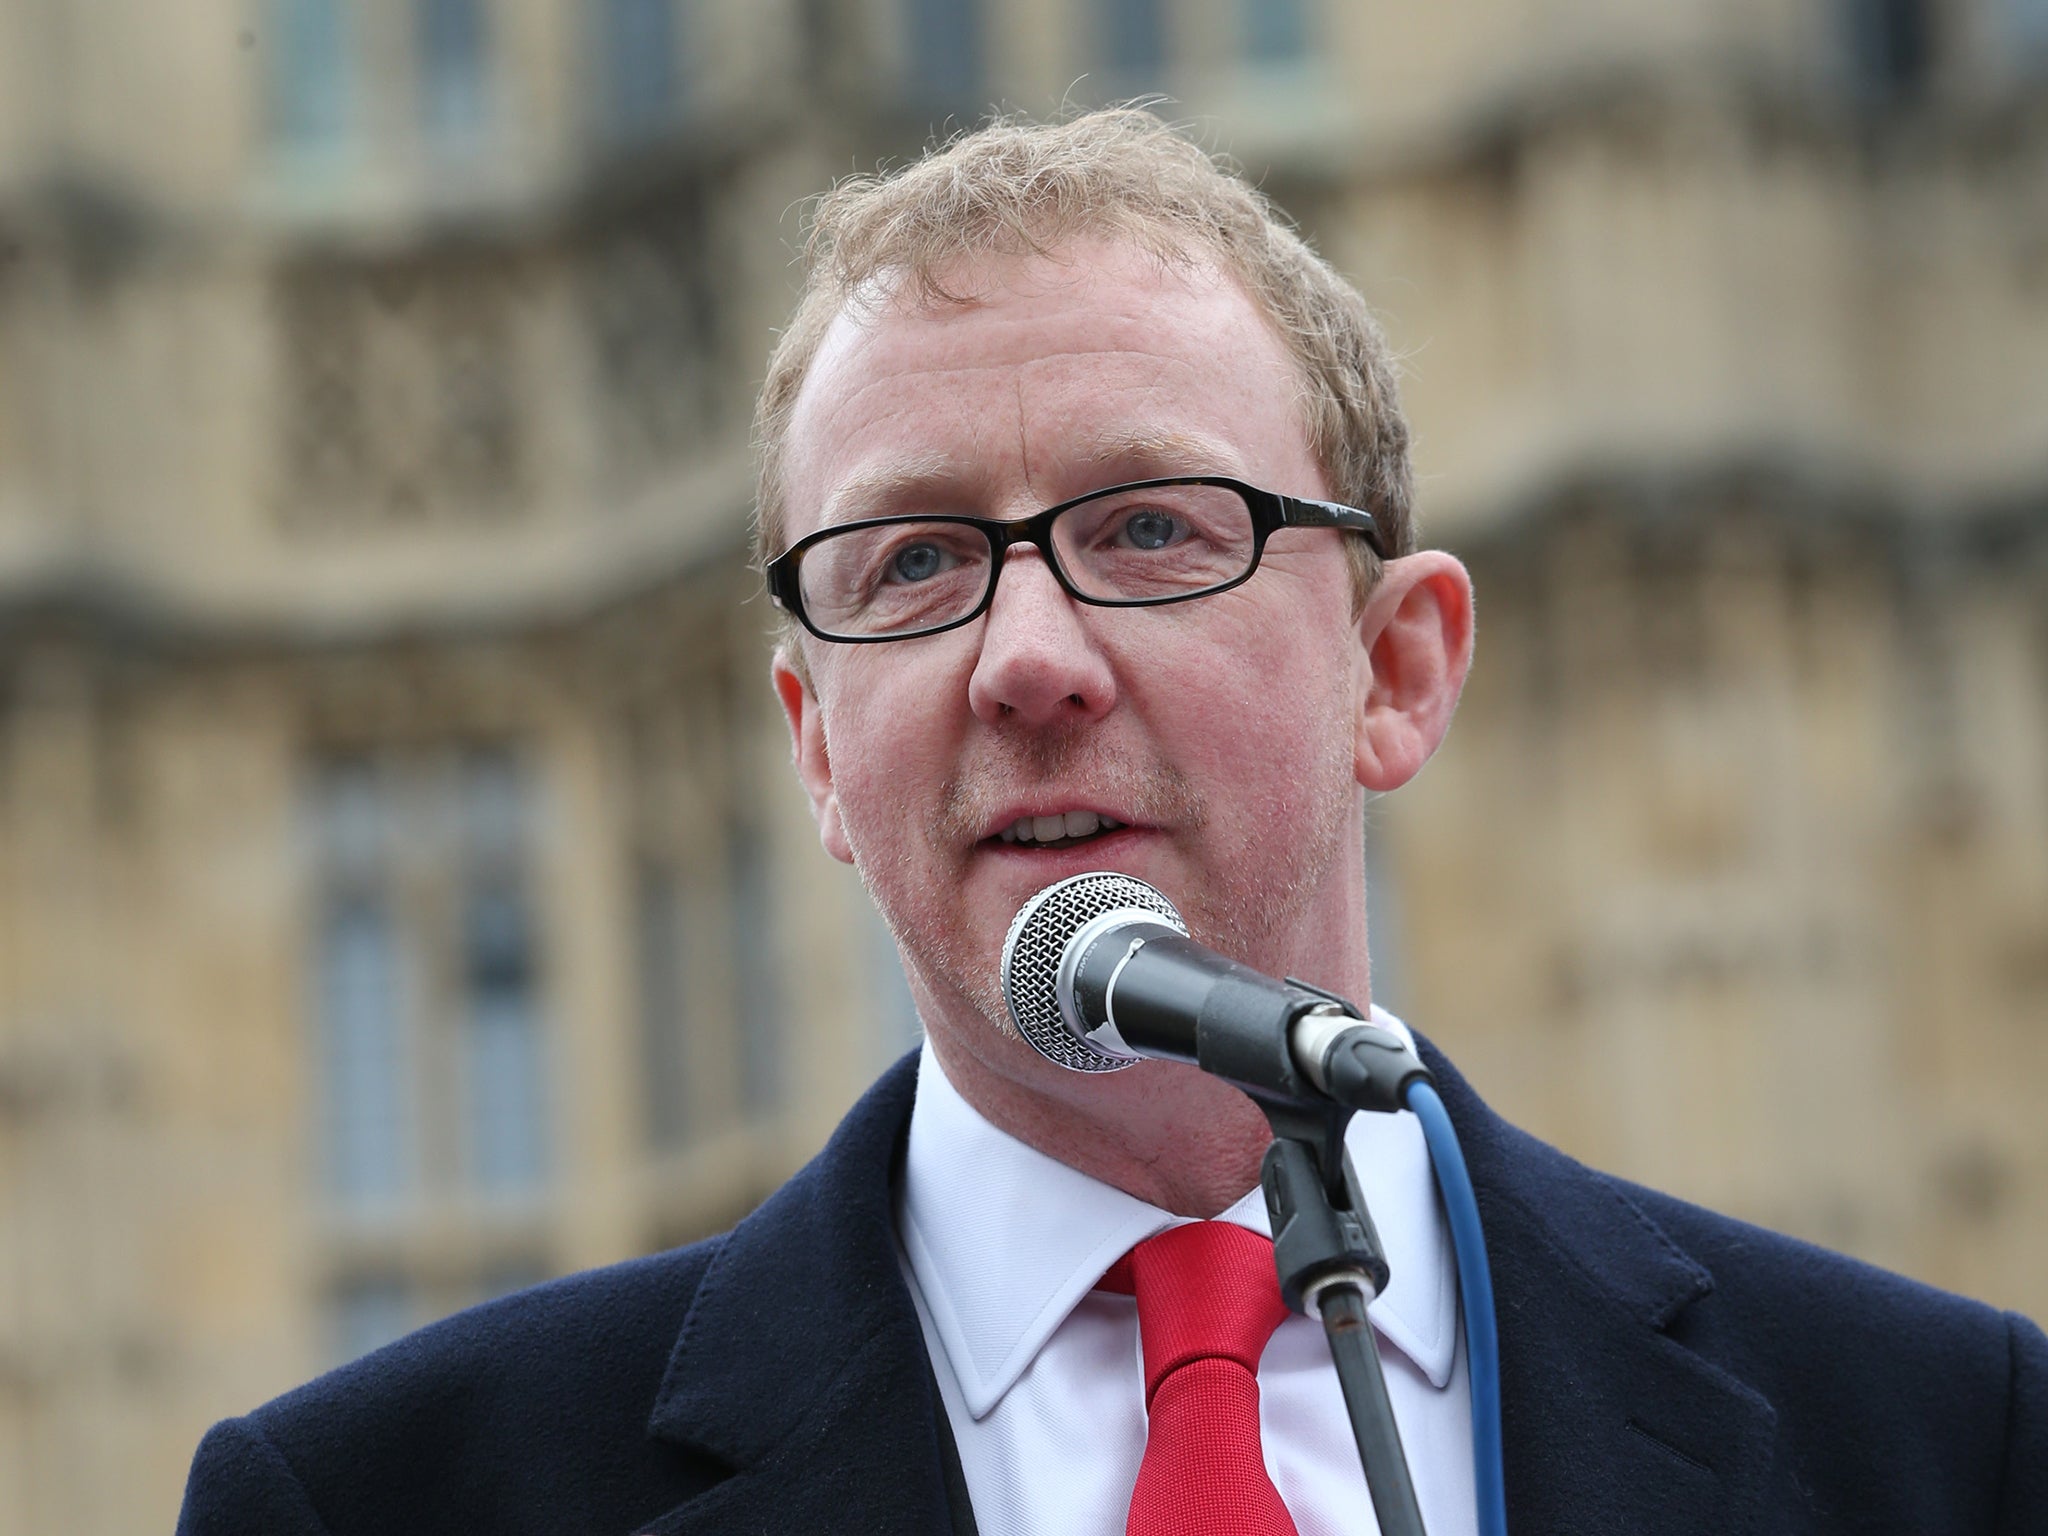 Blur drummer Dave Rowntree has been elected to Norfolk County Council for the Labour Party